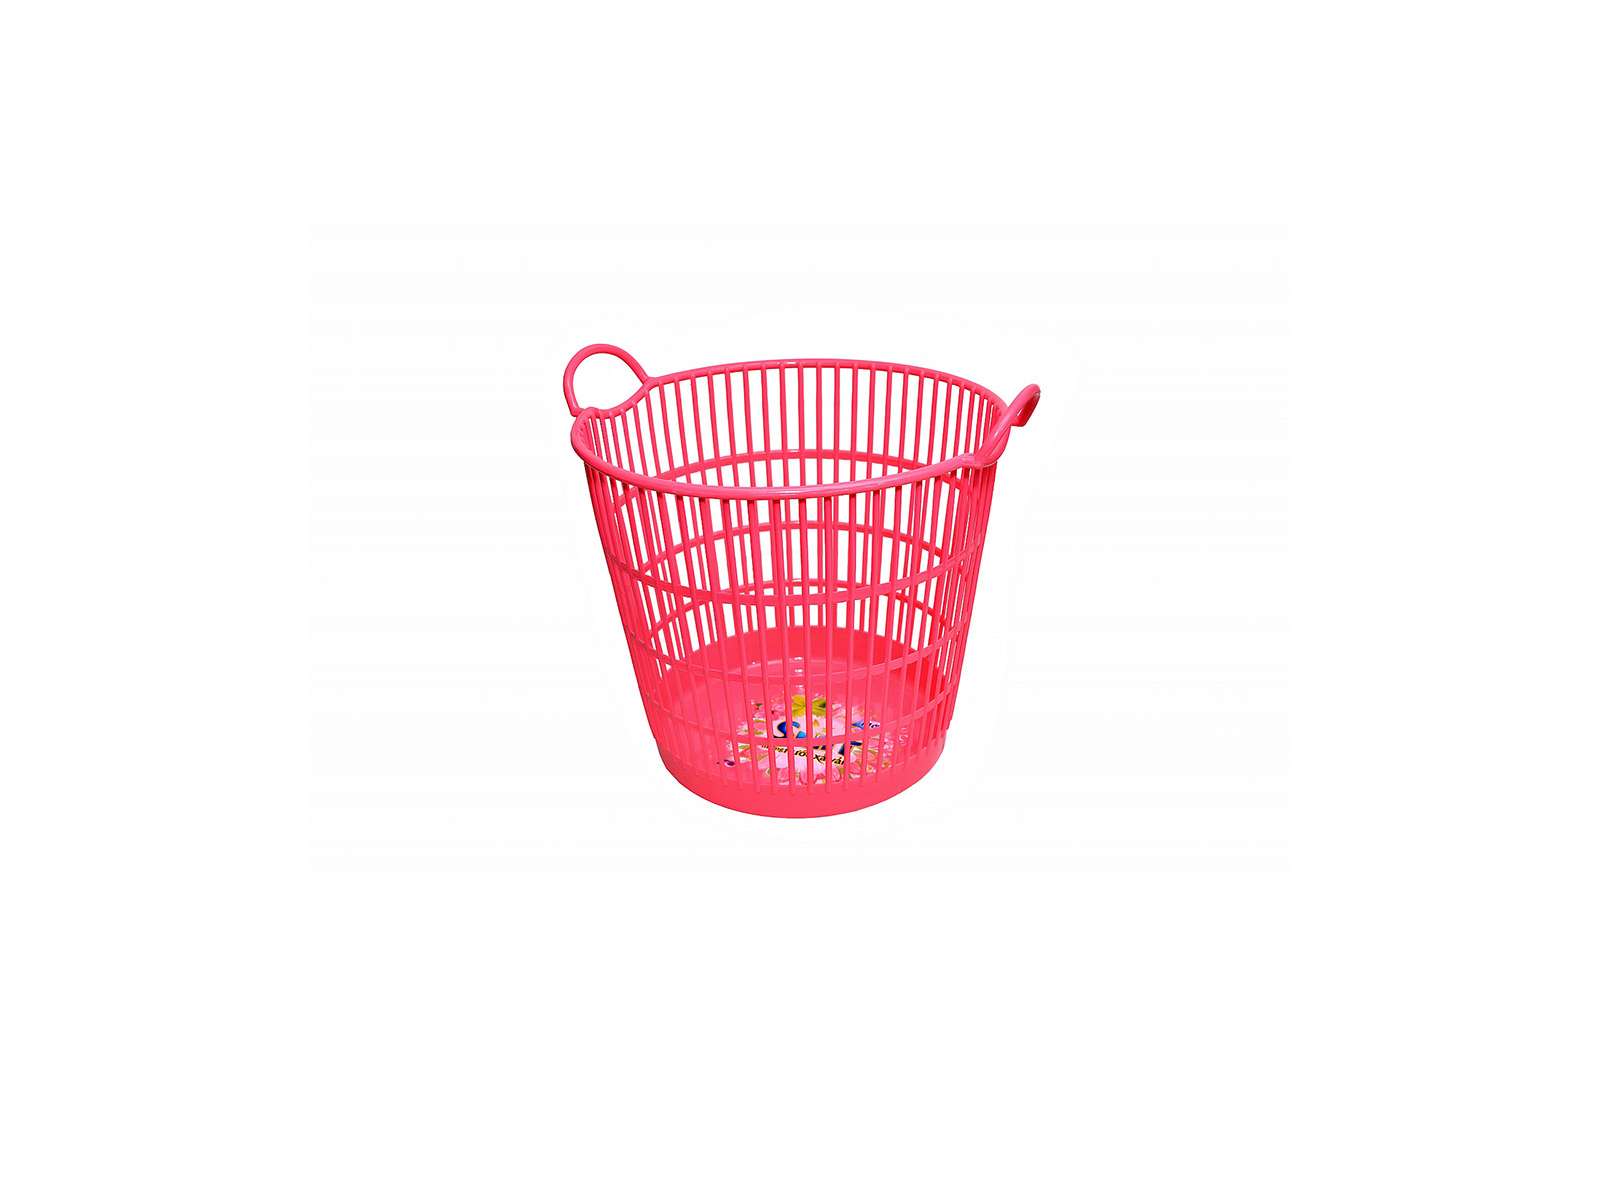 Oval Basket with 2 handles - Vertical stripes